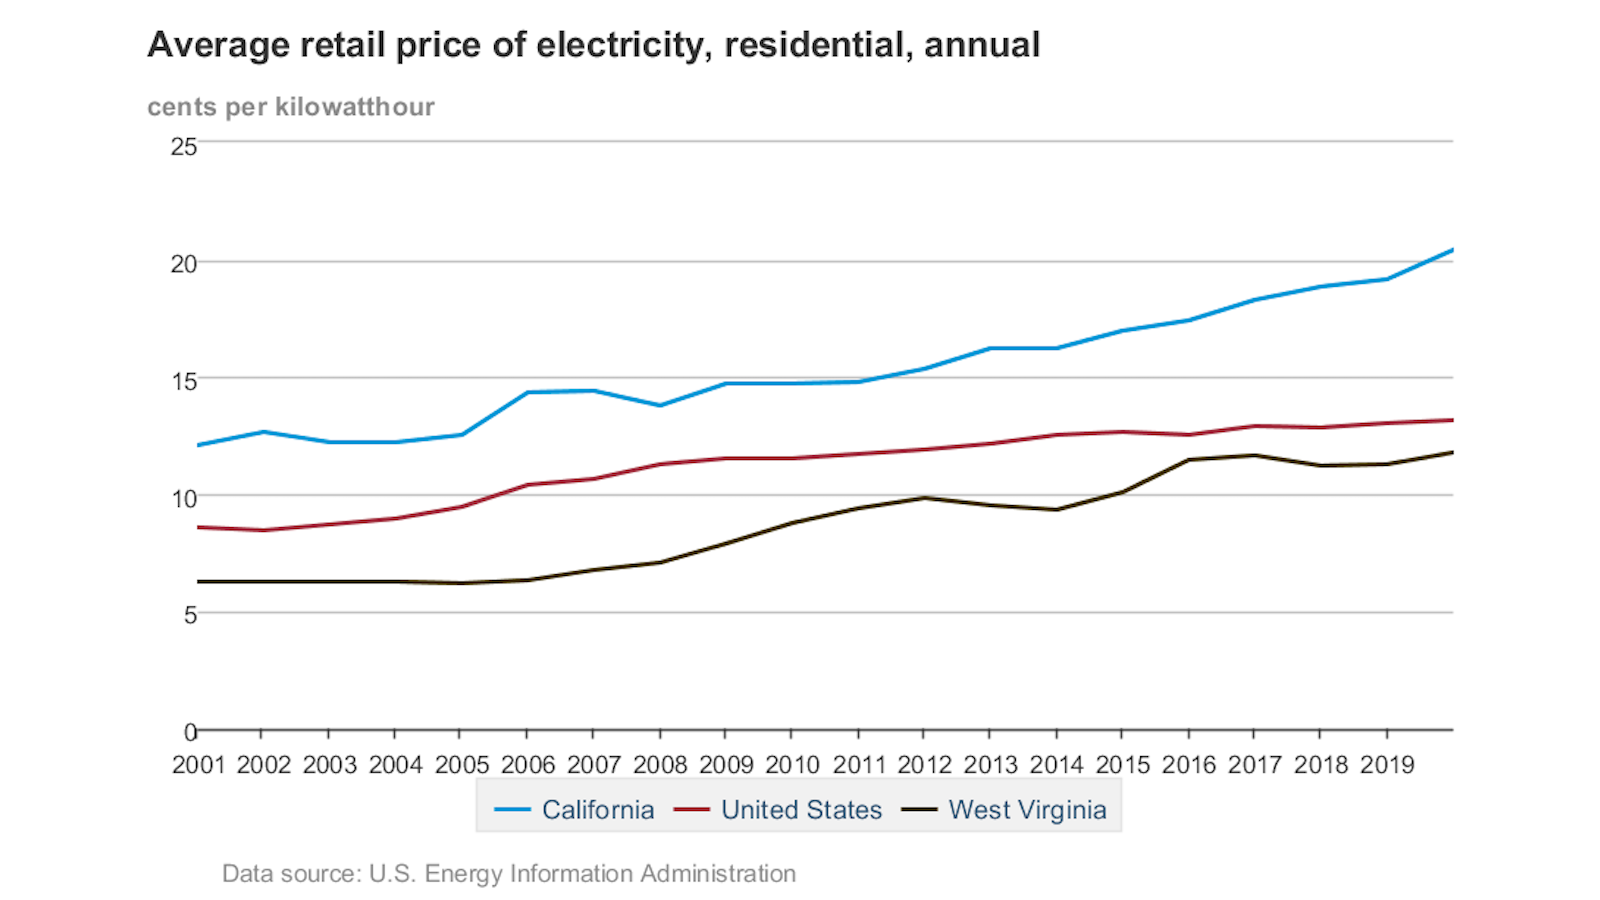 Electricity prices in the US